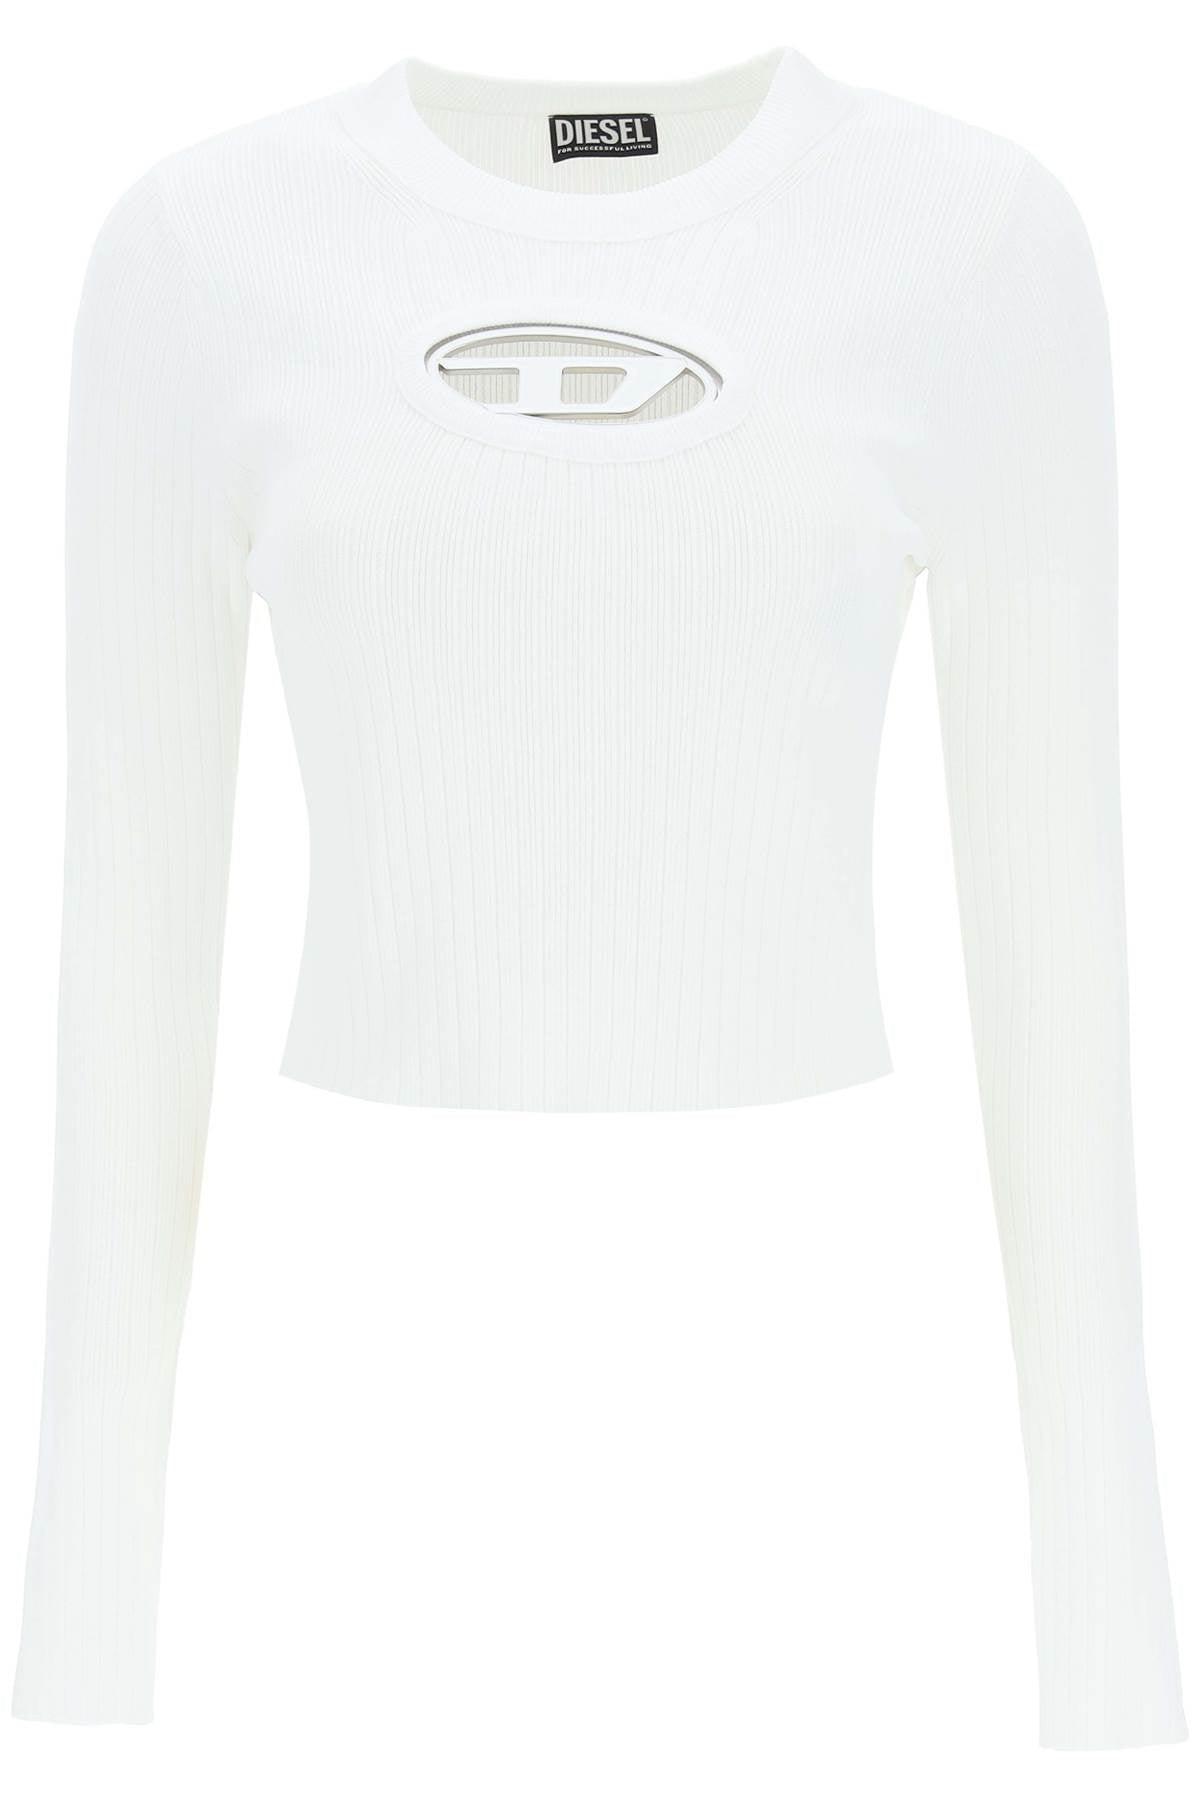 DIESEL Logo Cut-out Top in White | Lyst